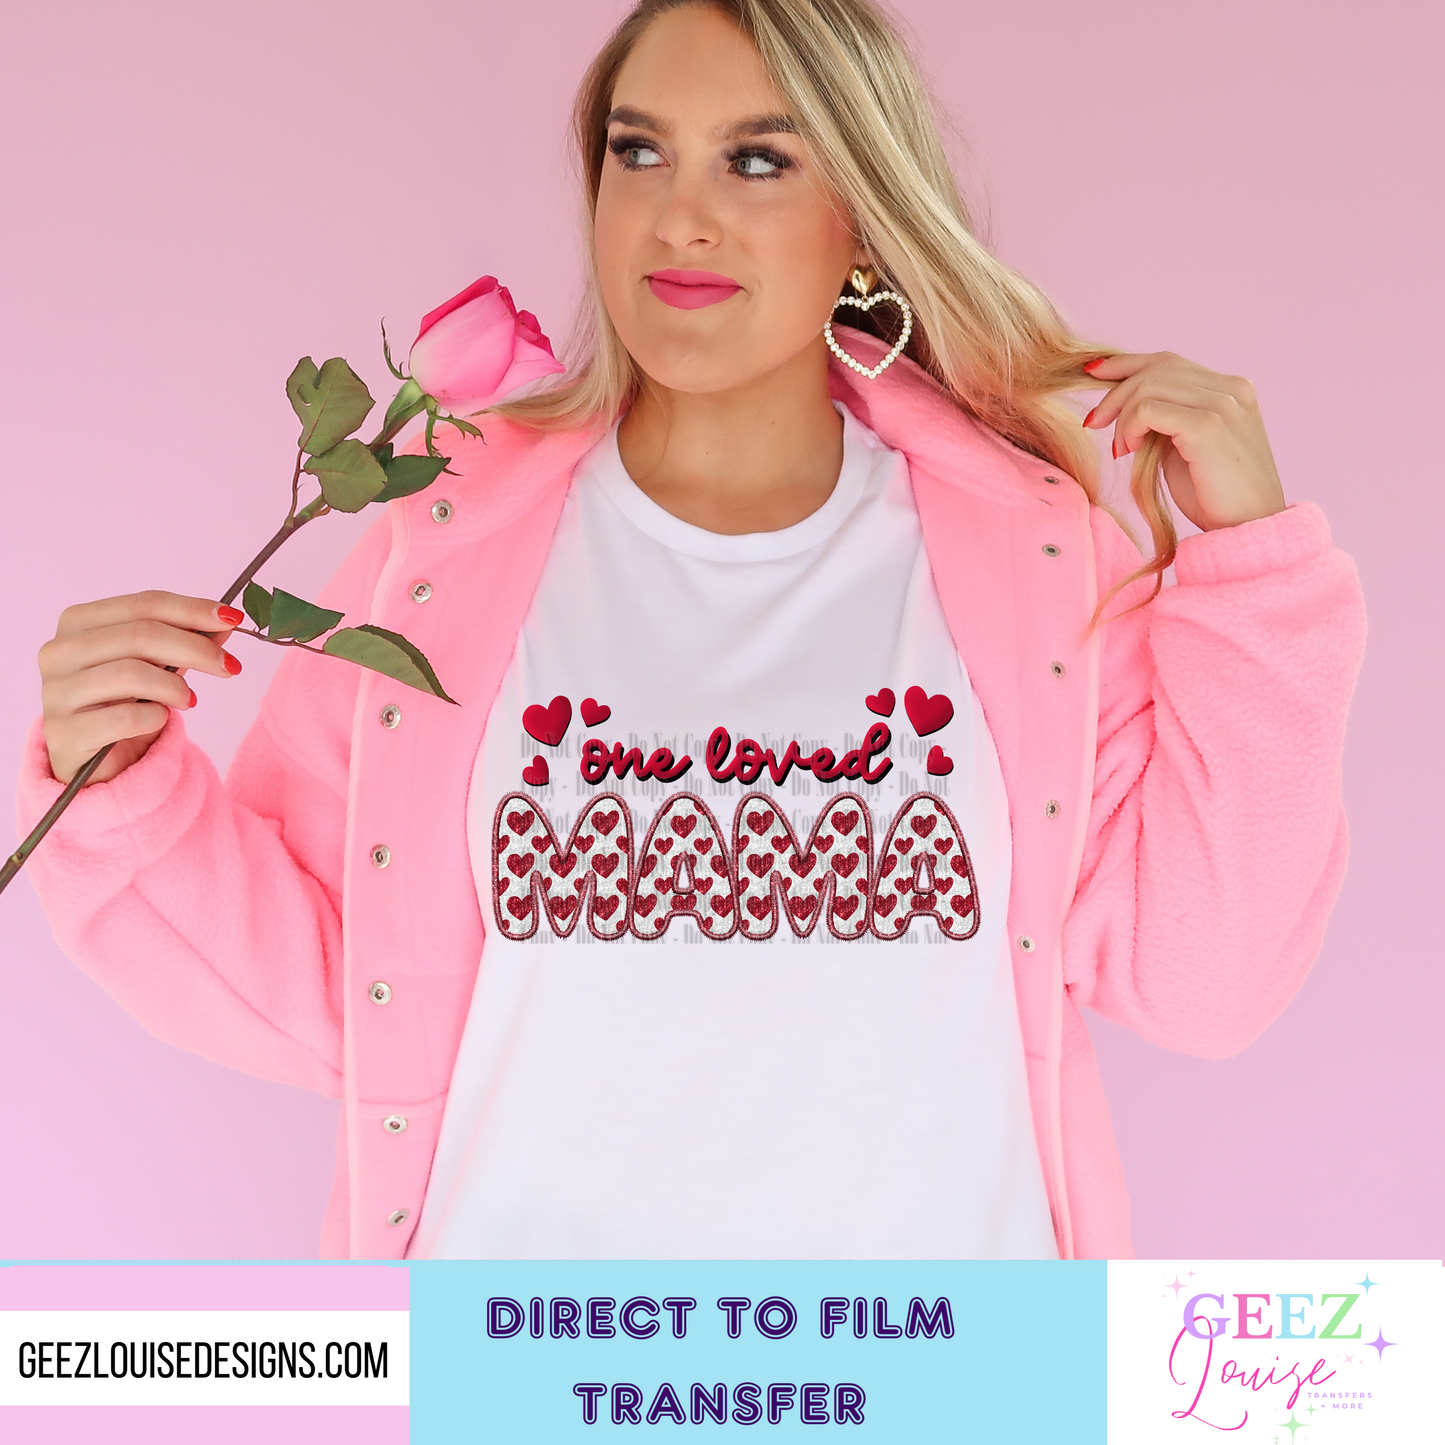 One loved Mama Valentine's - Direct to Film Transfer - made to order